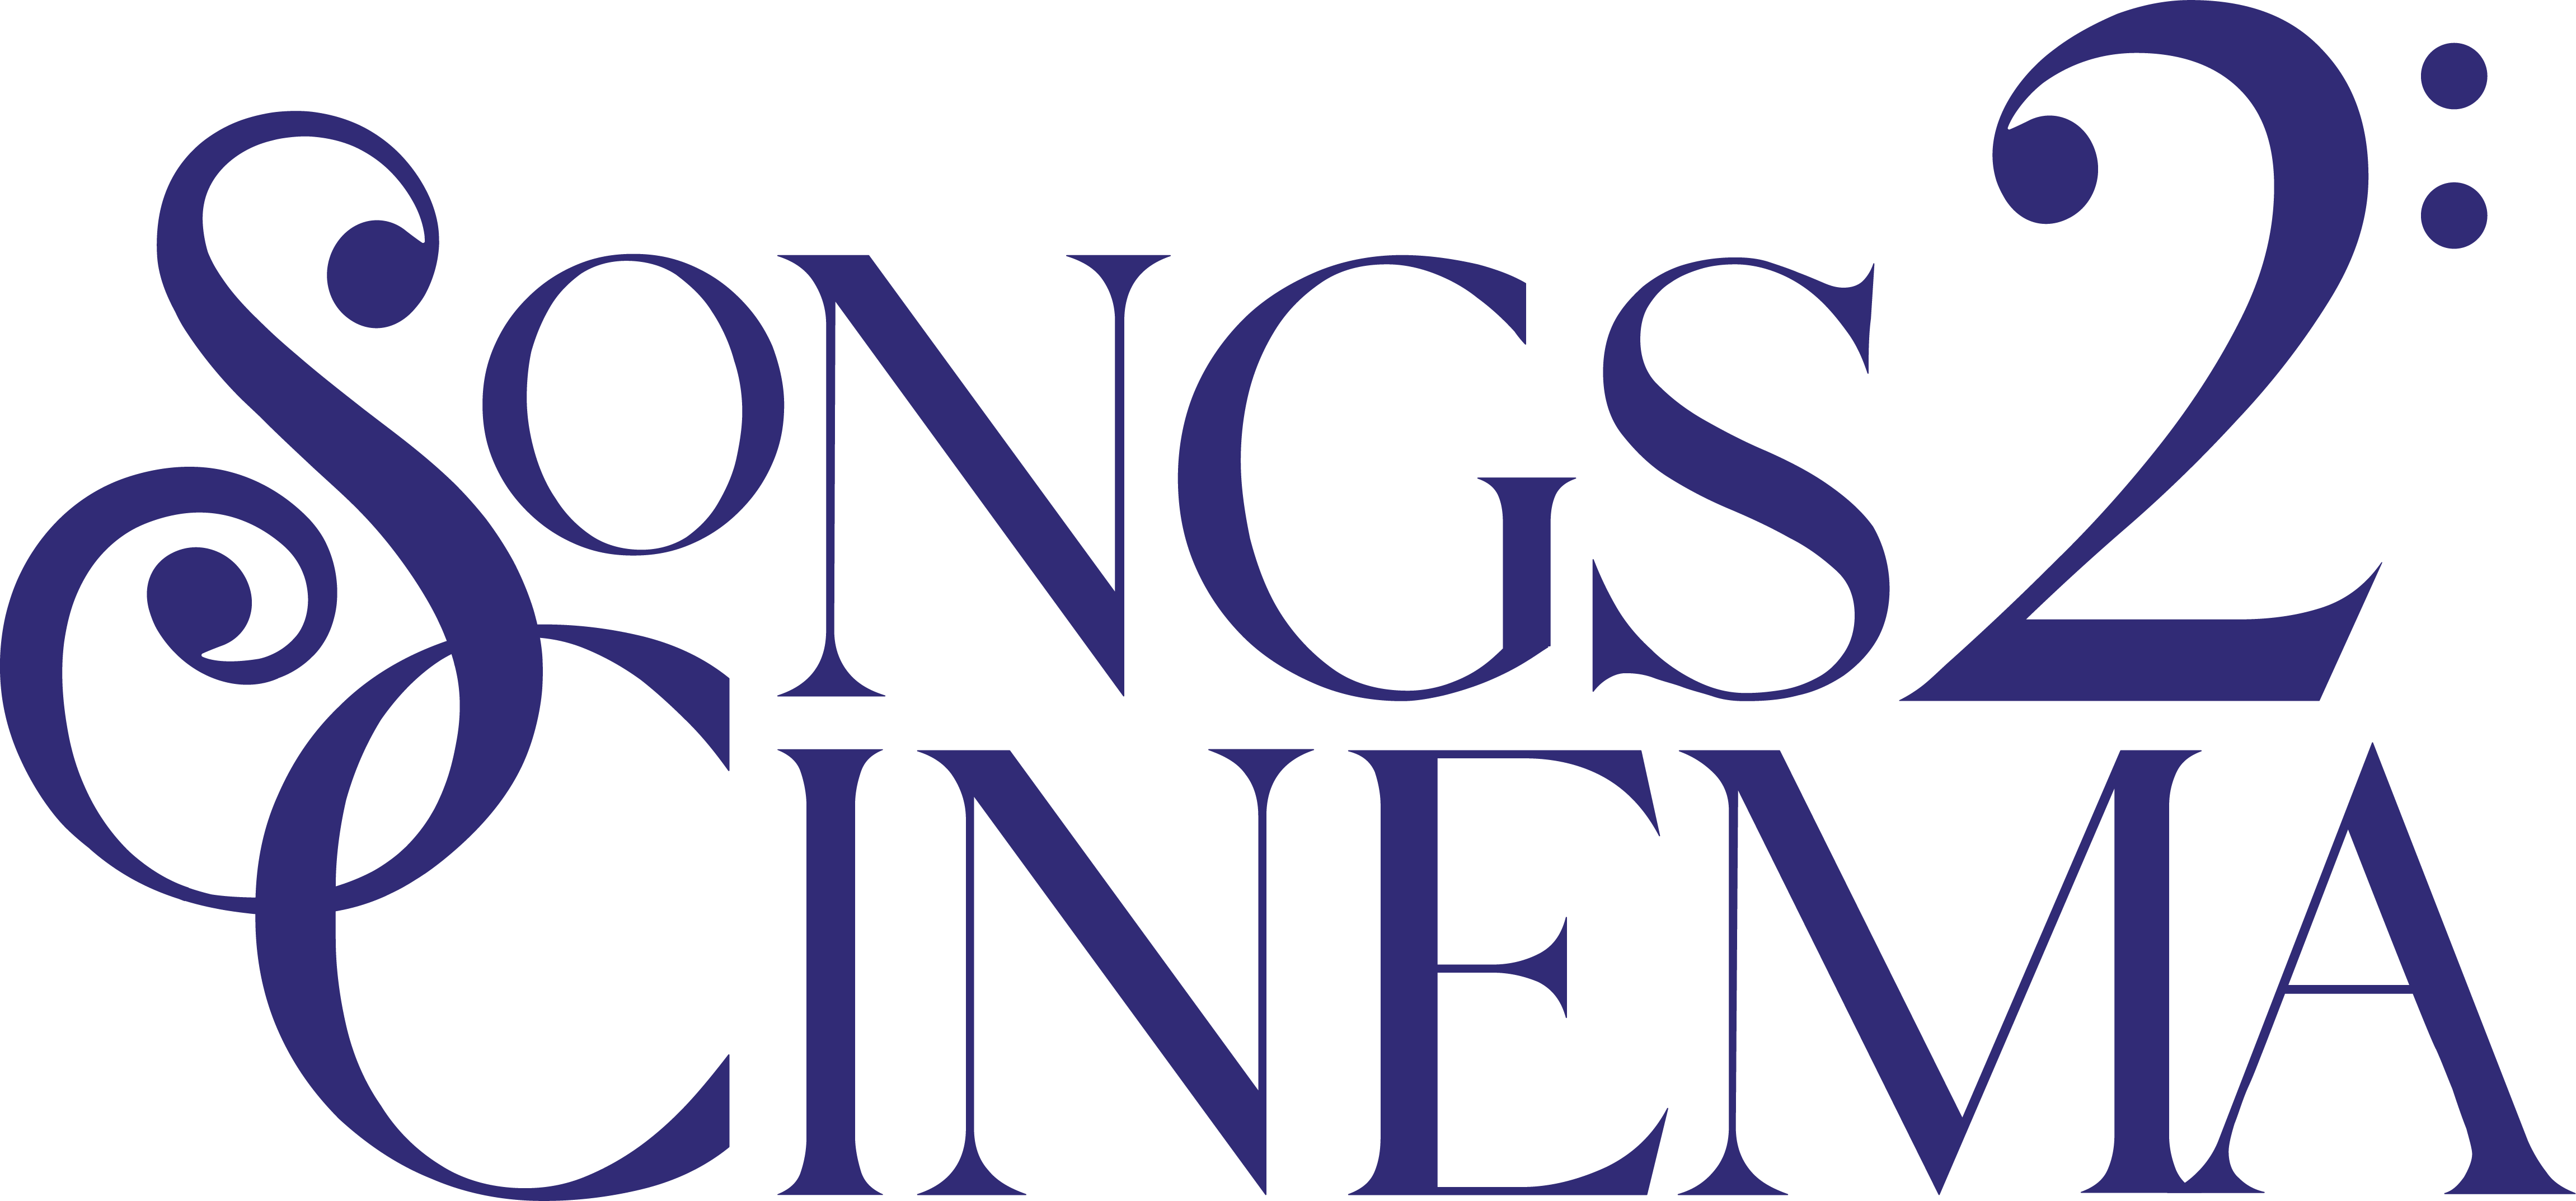 Songs2Cinema, Tuesday, May 4, 2021, Press release picture